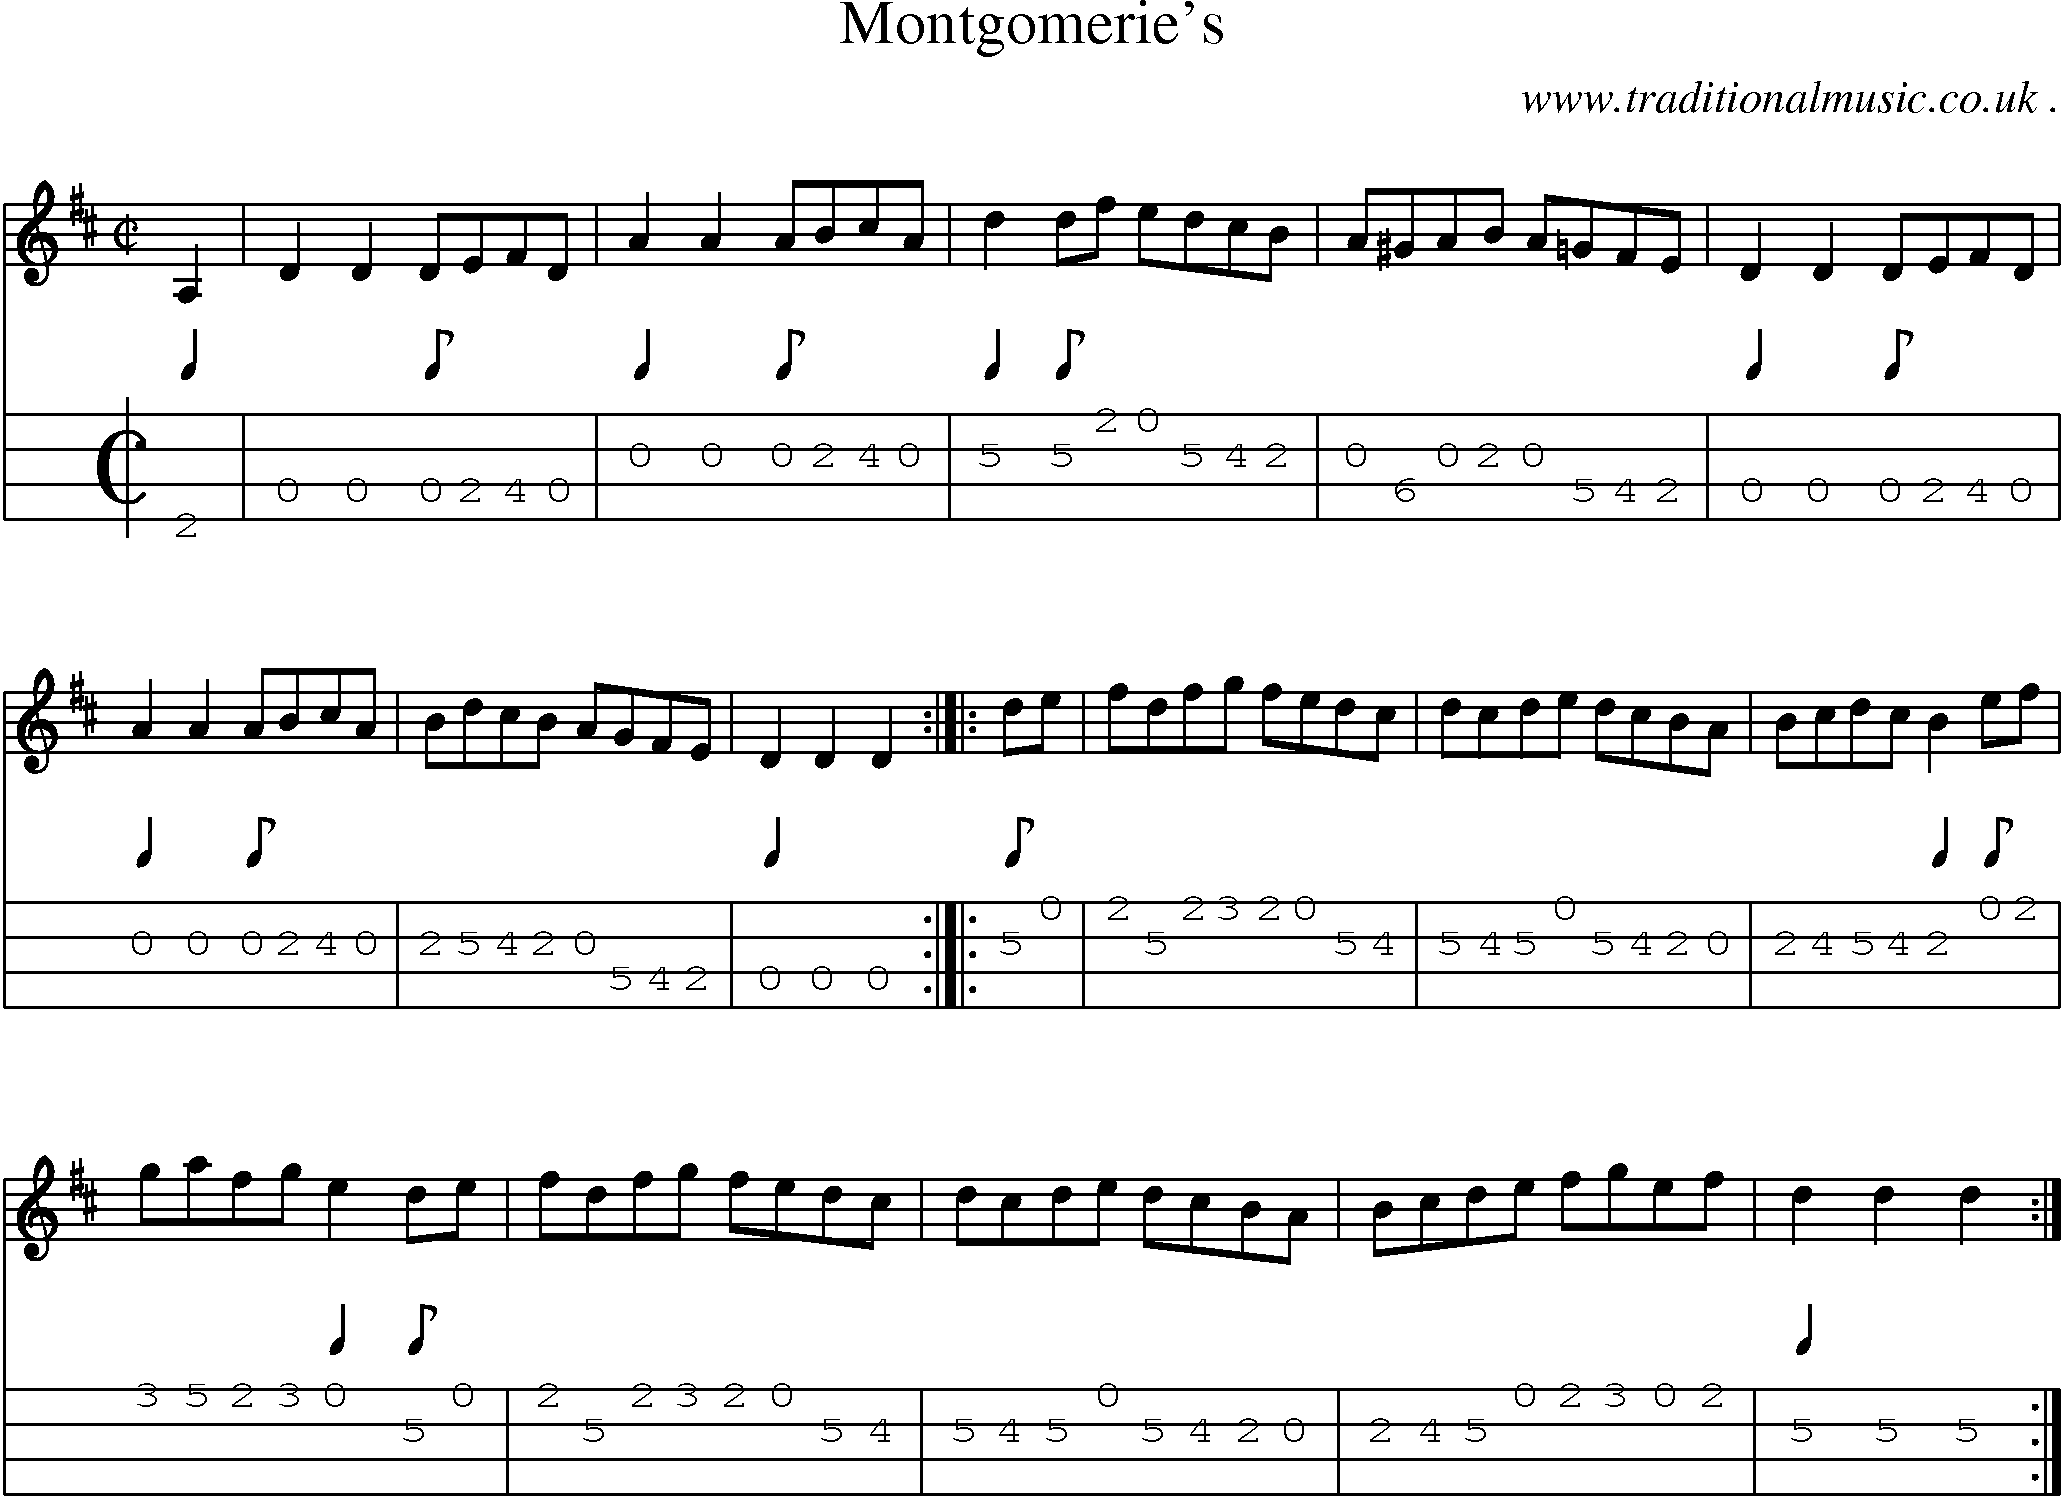 Sheet-music  score, Chords and Mandolin Tabs for Montgomeries